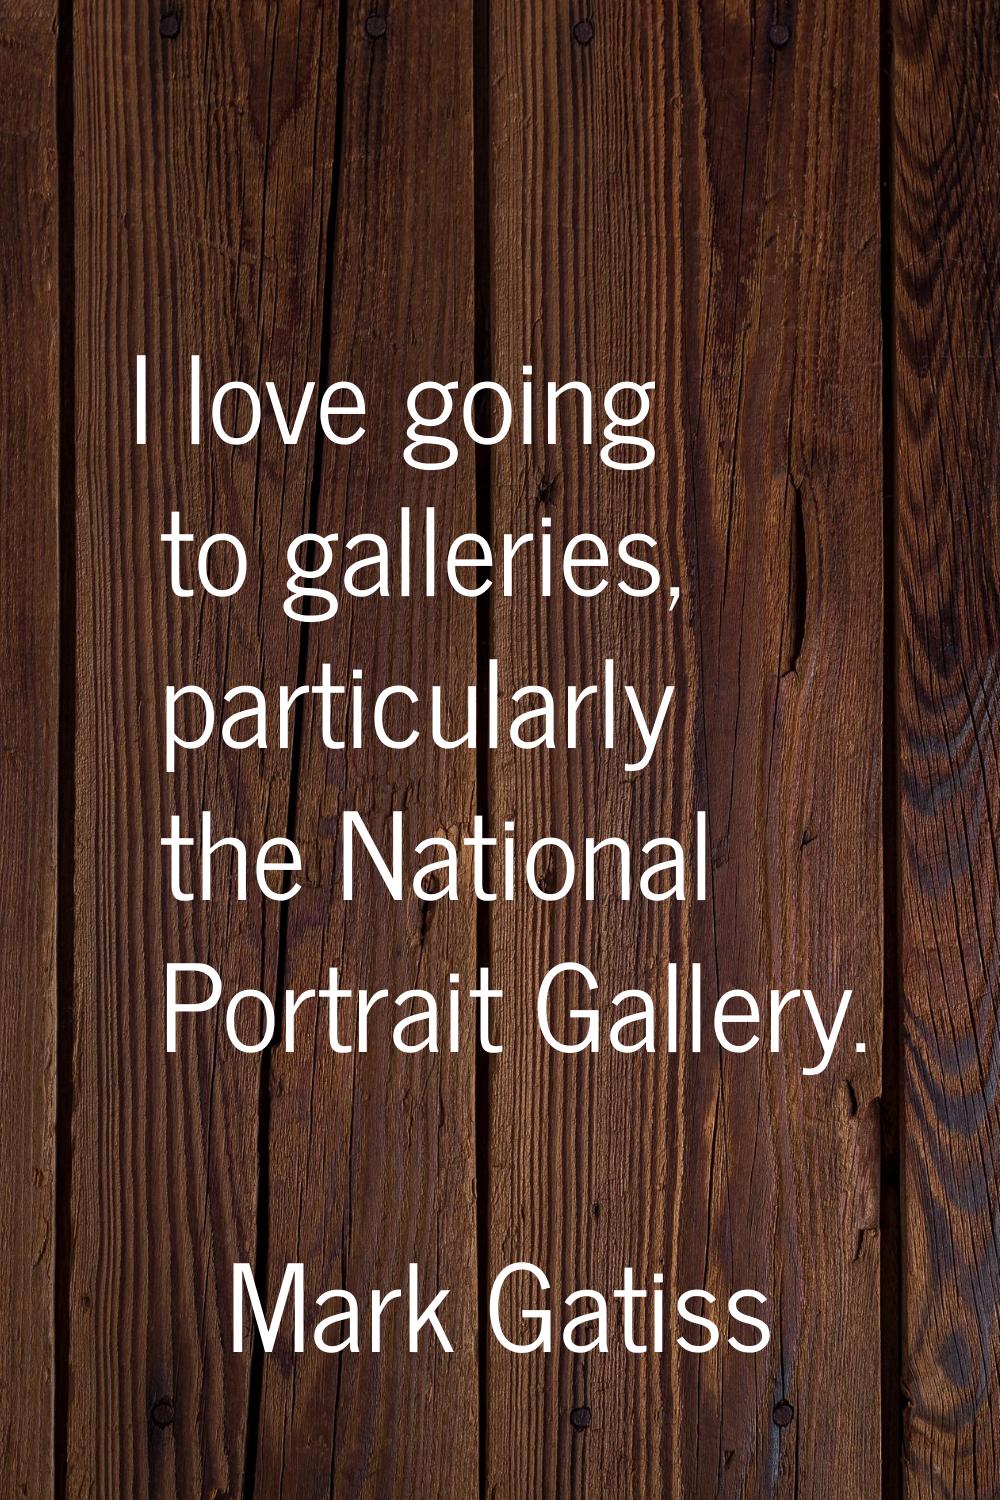 I love going to galleries, particularly the National Portrait Gallery.